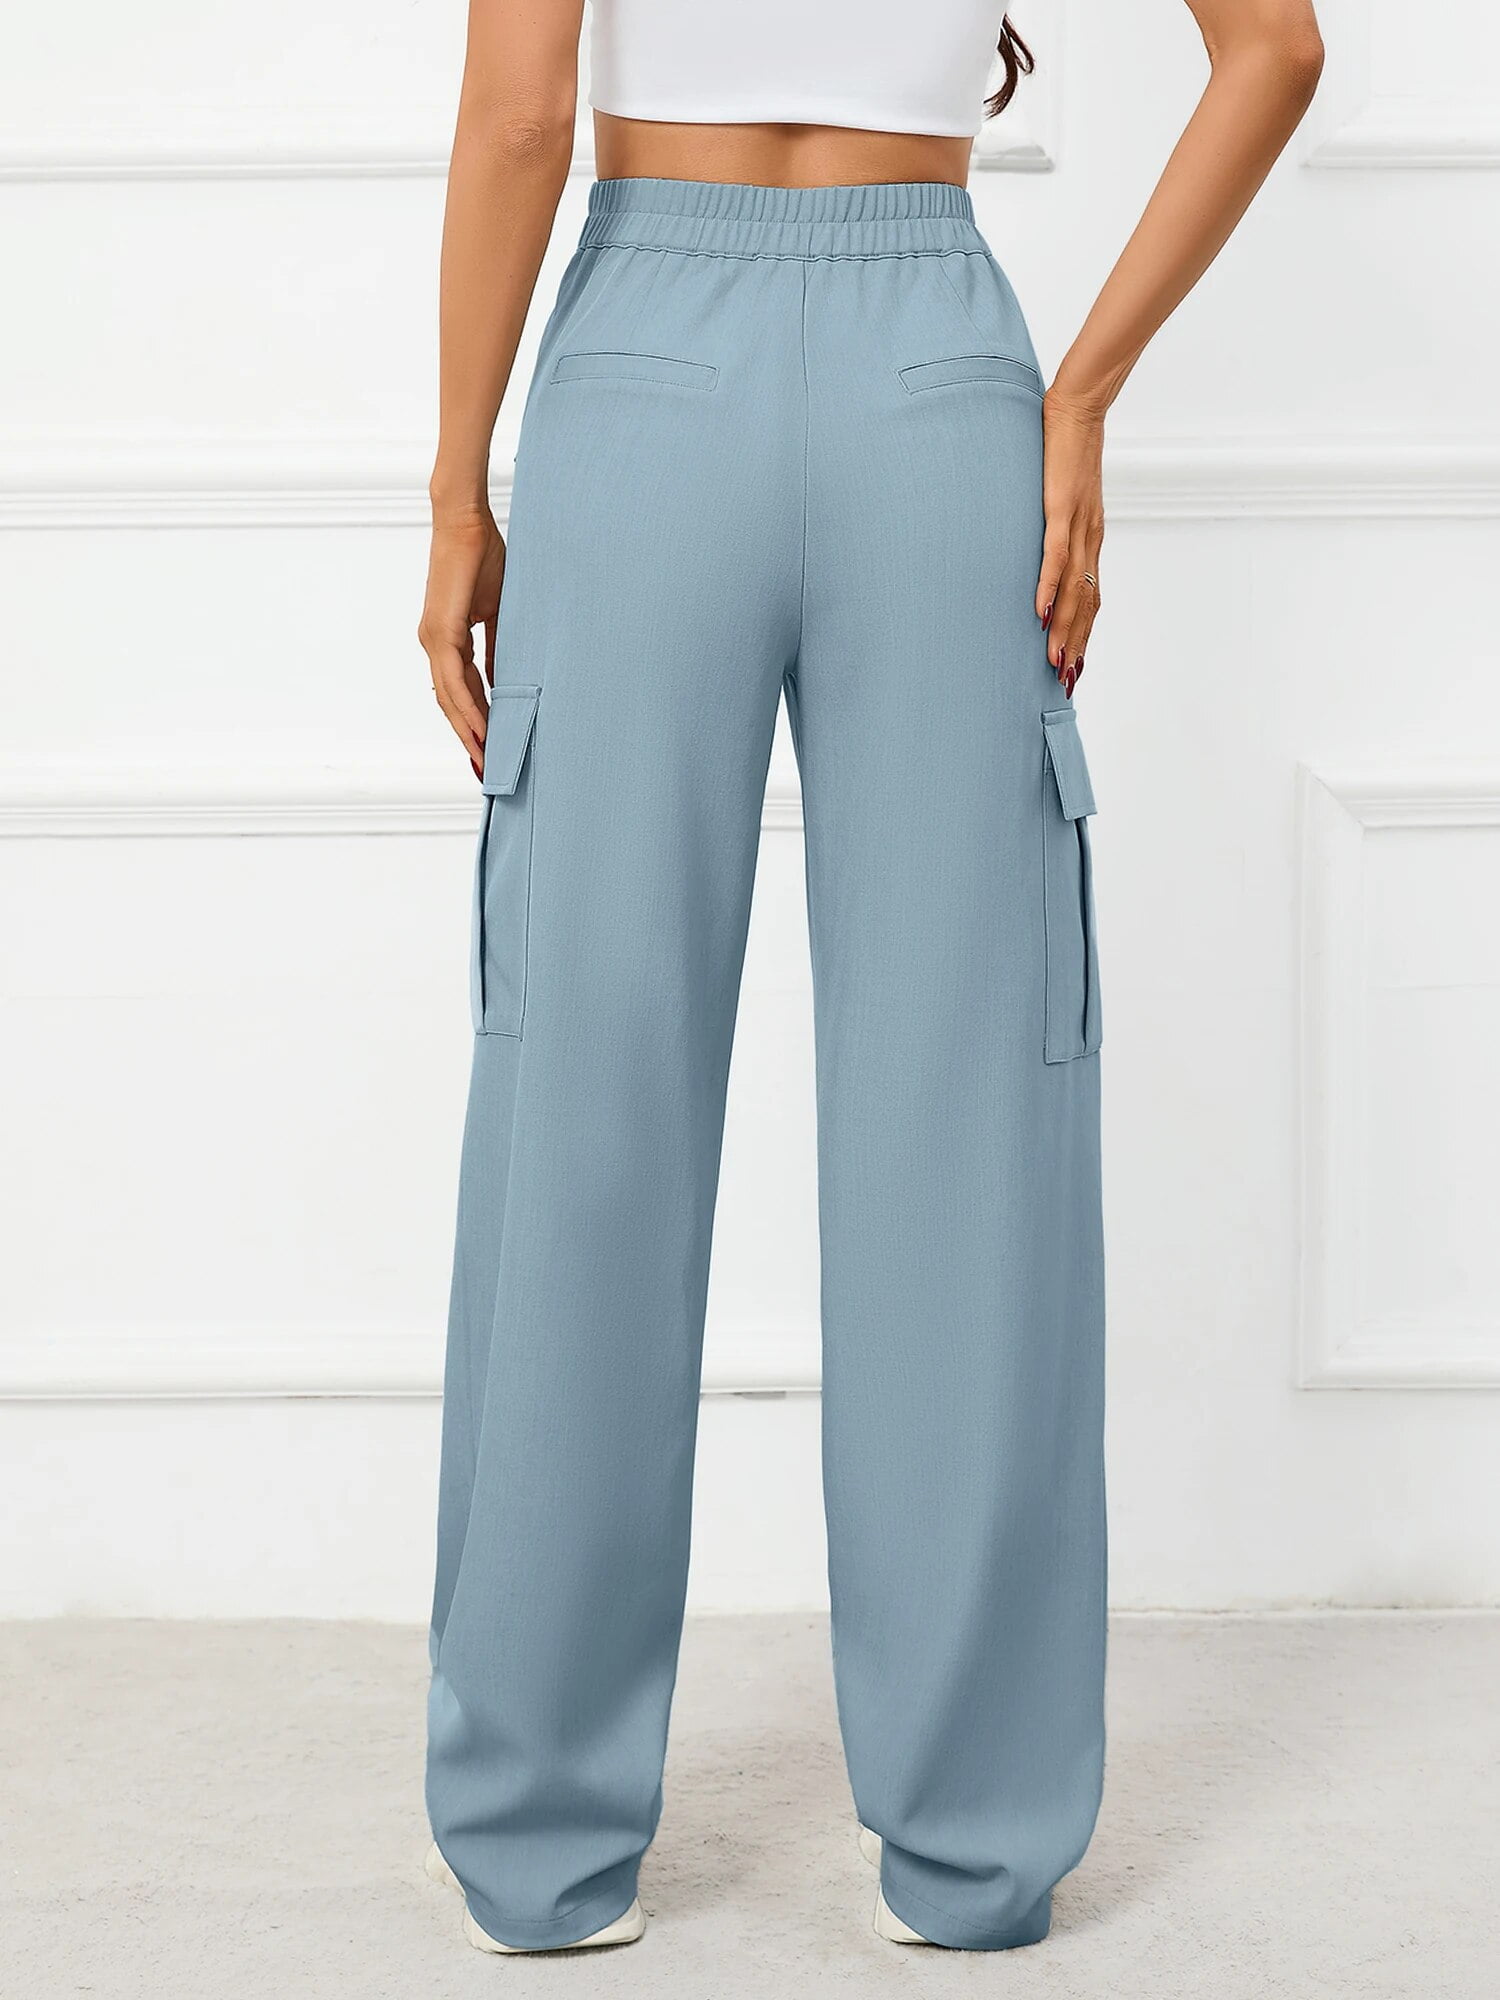 Women's Palazzo Pants for sale in King Edward Park